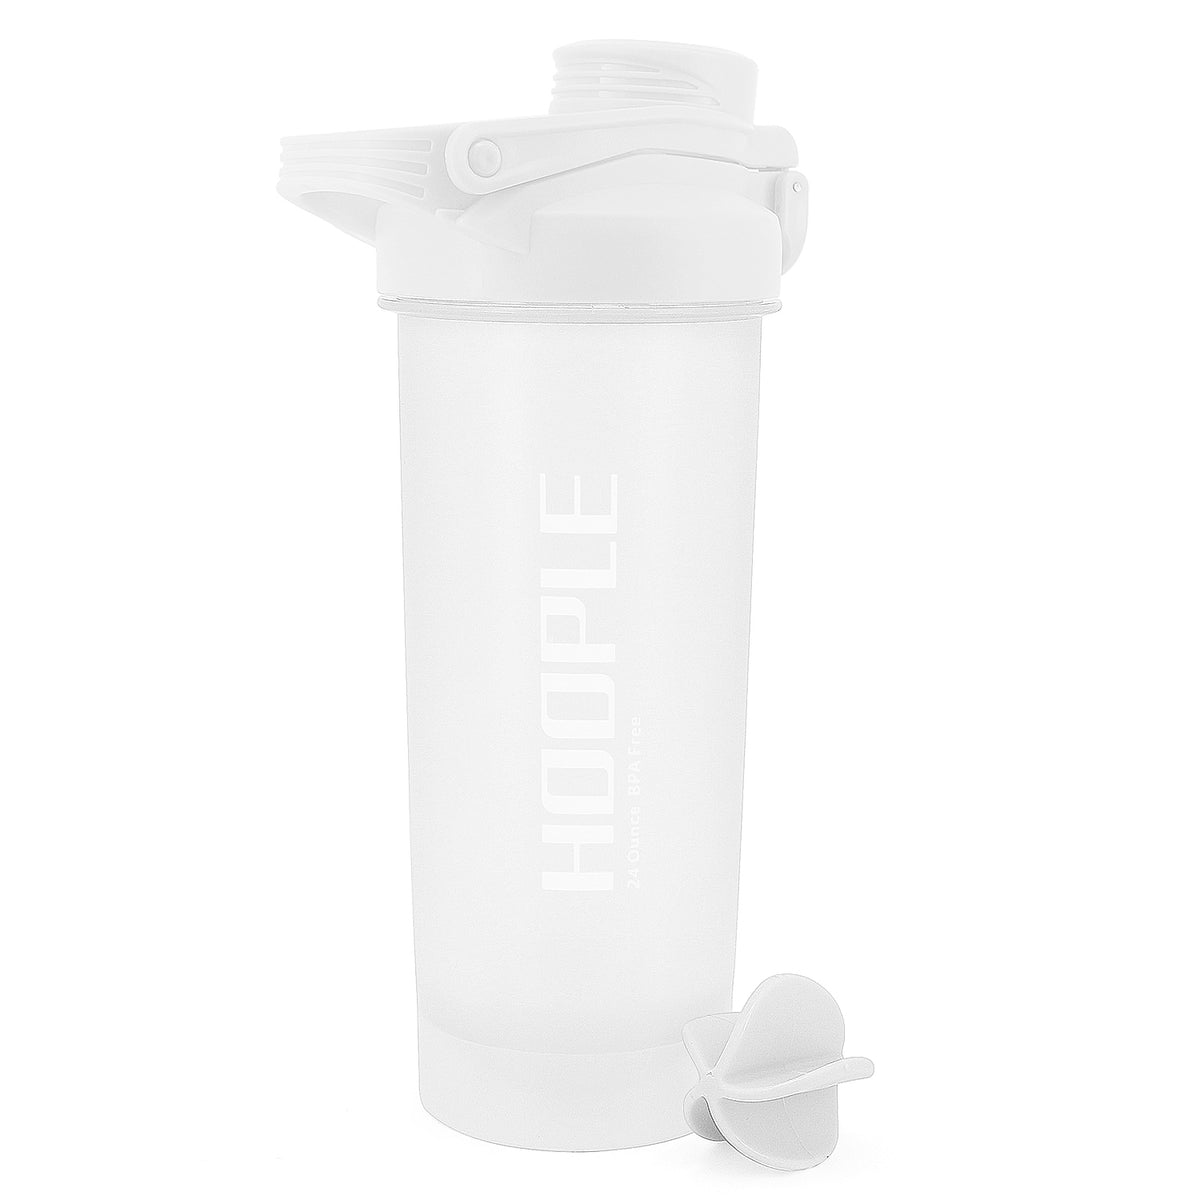 Hoople 24 OZ Shaker Bottle Protein Powder Shake Blender Gym Smoothie Cup,  BPA Free, Auto-Flip Leak-Proof Lid, Handle with Ball Included - Aqua –  TOPOKO